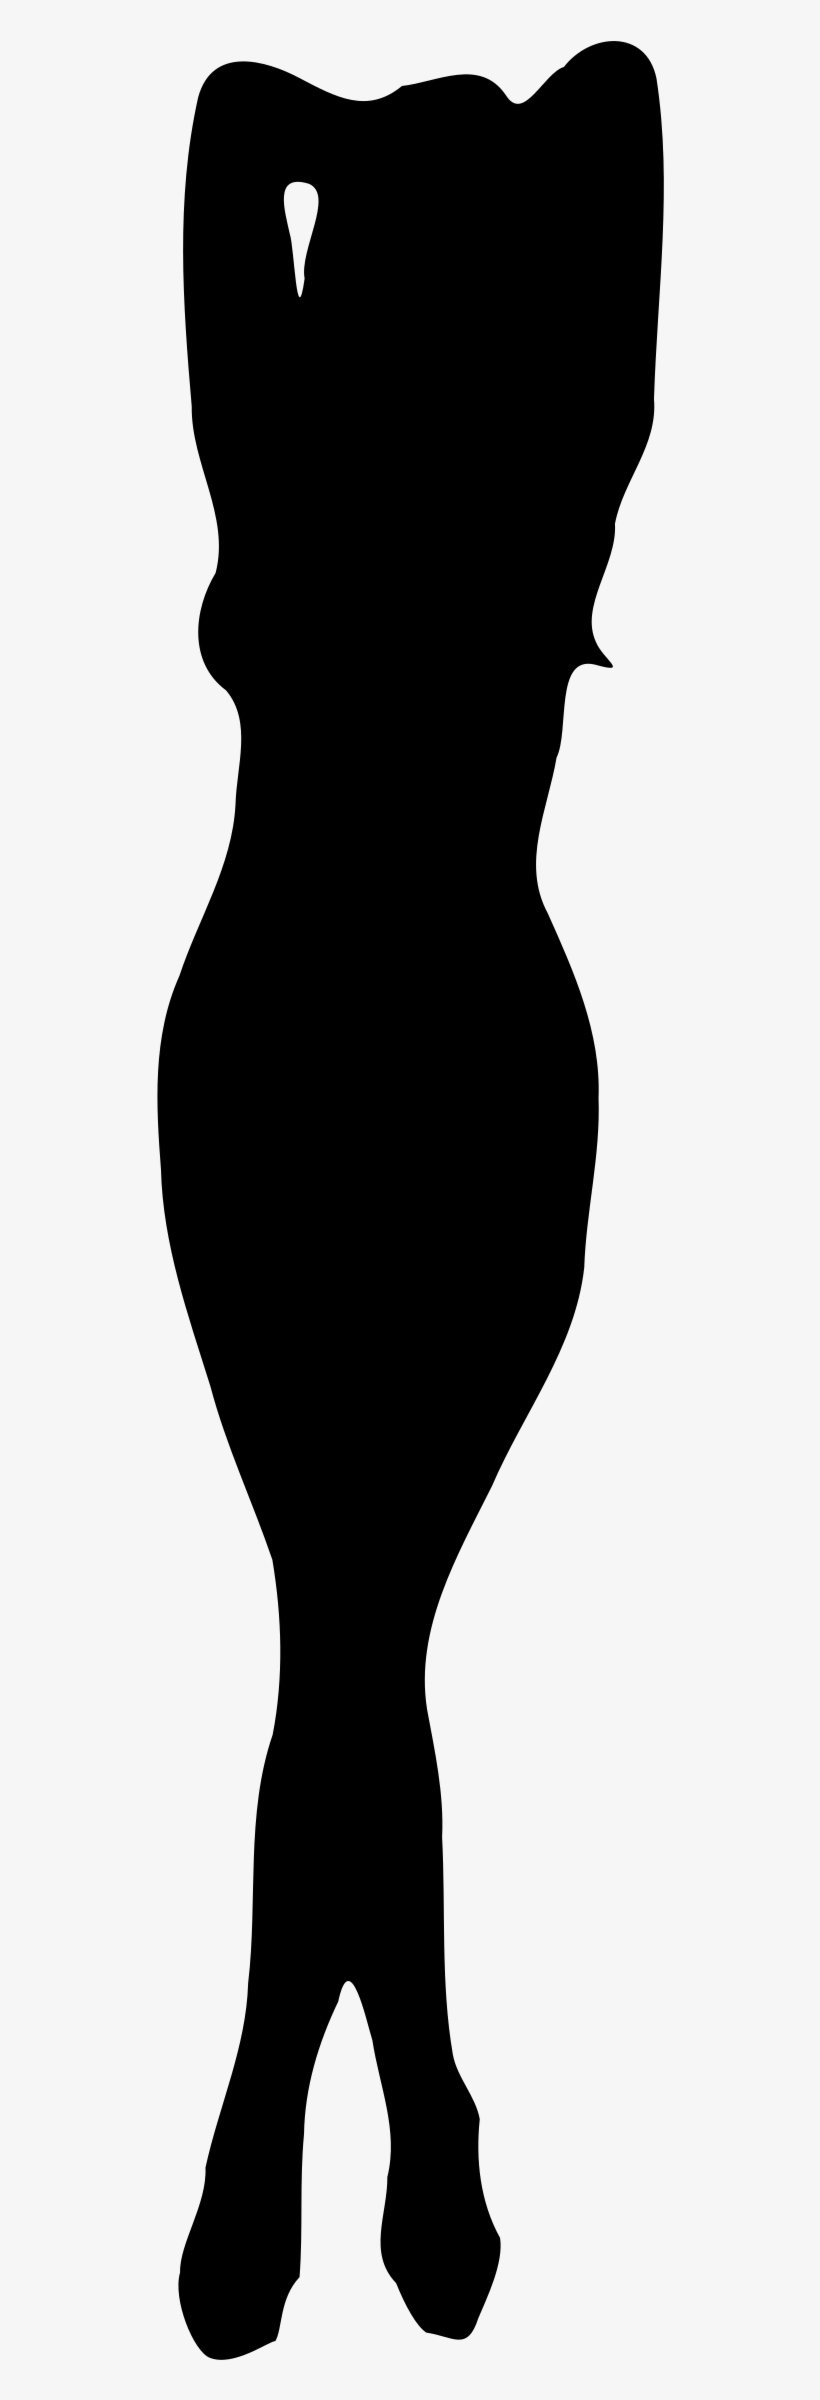 Woman Silhouette 15 Icons Png - Silhouette Of Curvy Women - Free ...